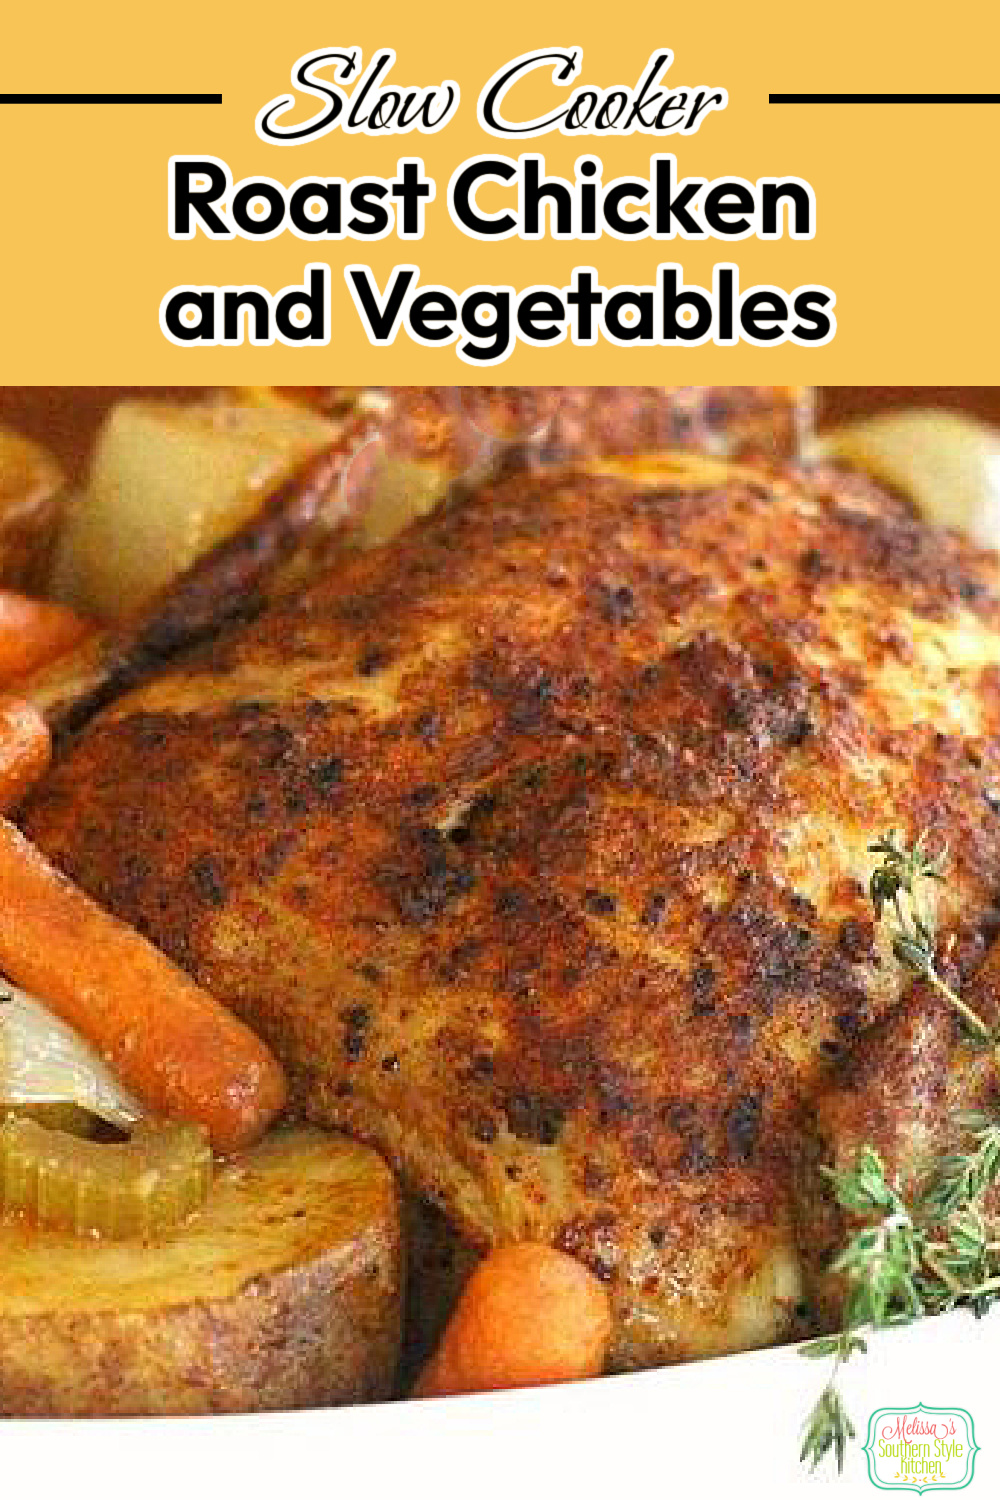 Make this delicious chicken dinner classic with ease using your slow cooker #roastchicken #slowcookerchicken #slowcookerroastchicken #easychickenrecipes #chicken #vegetables #slowcookerrecipes #crockpotchickenrecipes #dinner #dinnerideas #southernfood #southernrecipes via @melissasssk